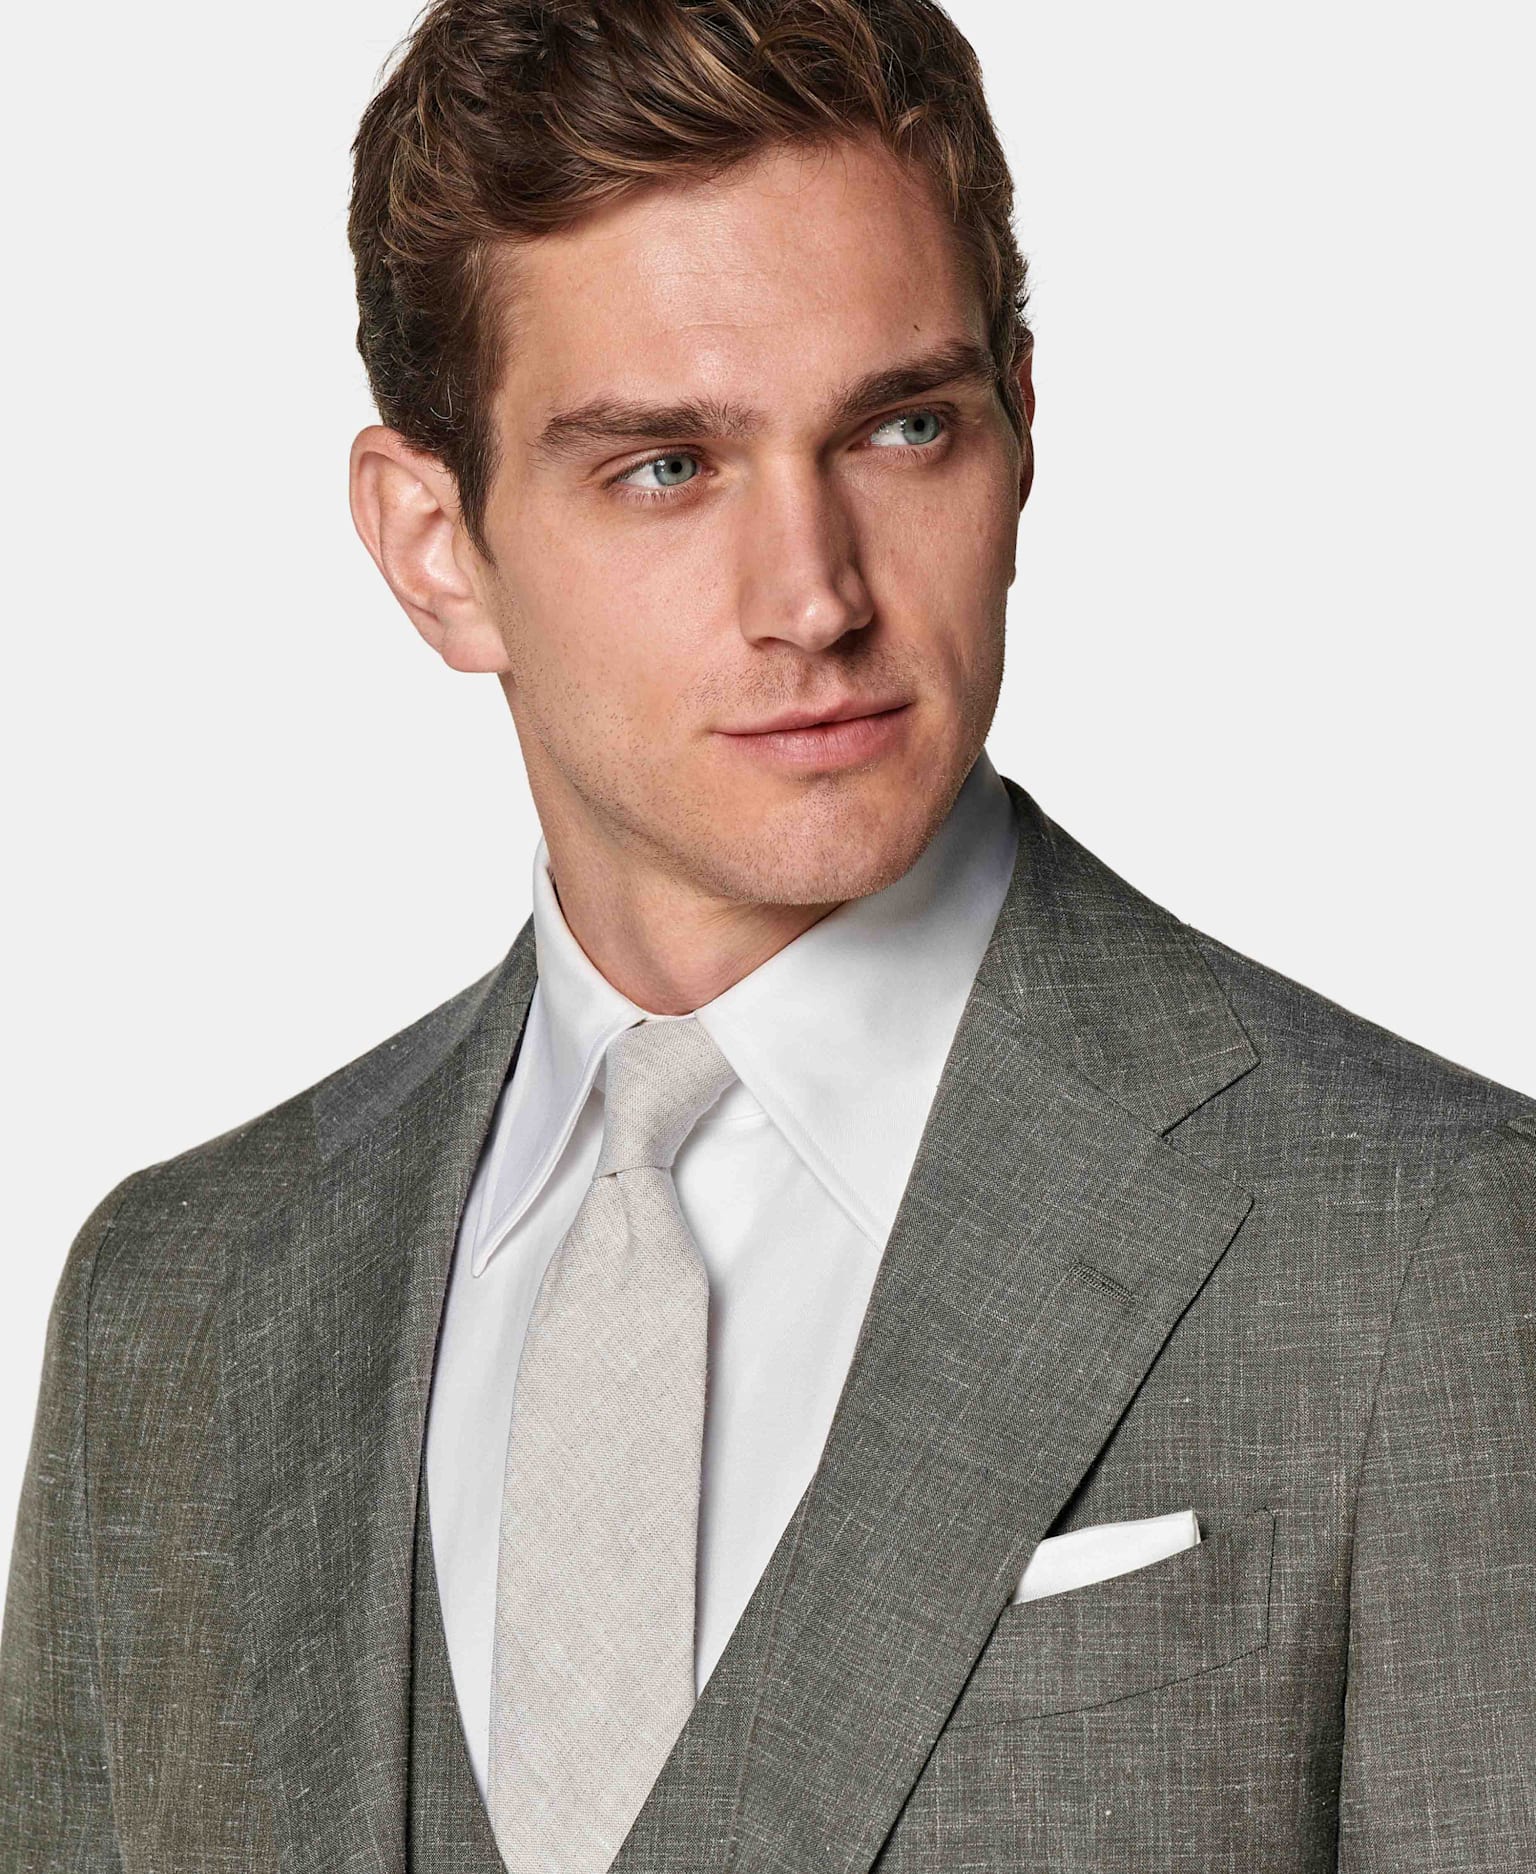 Mid-green three-piece suit with white shirt and light grey tie.